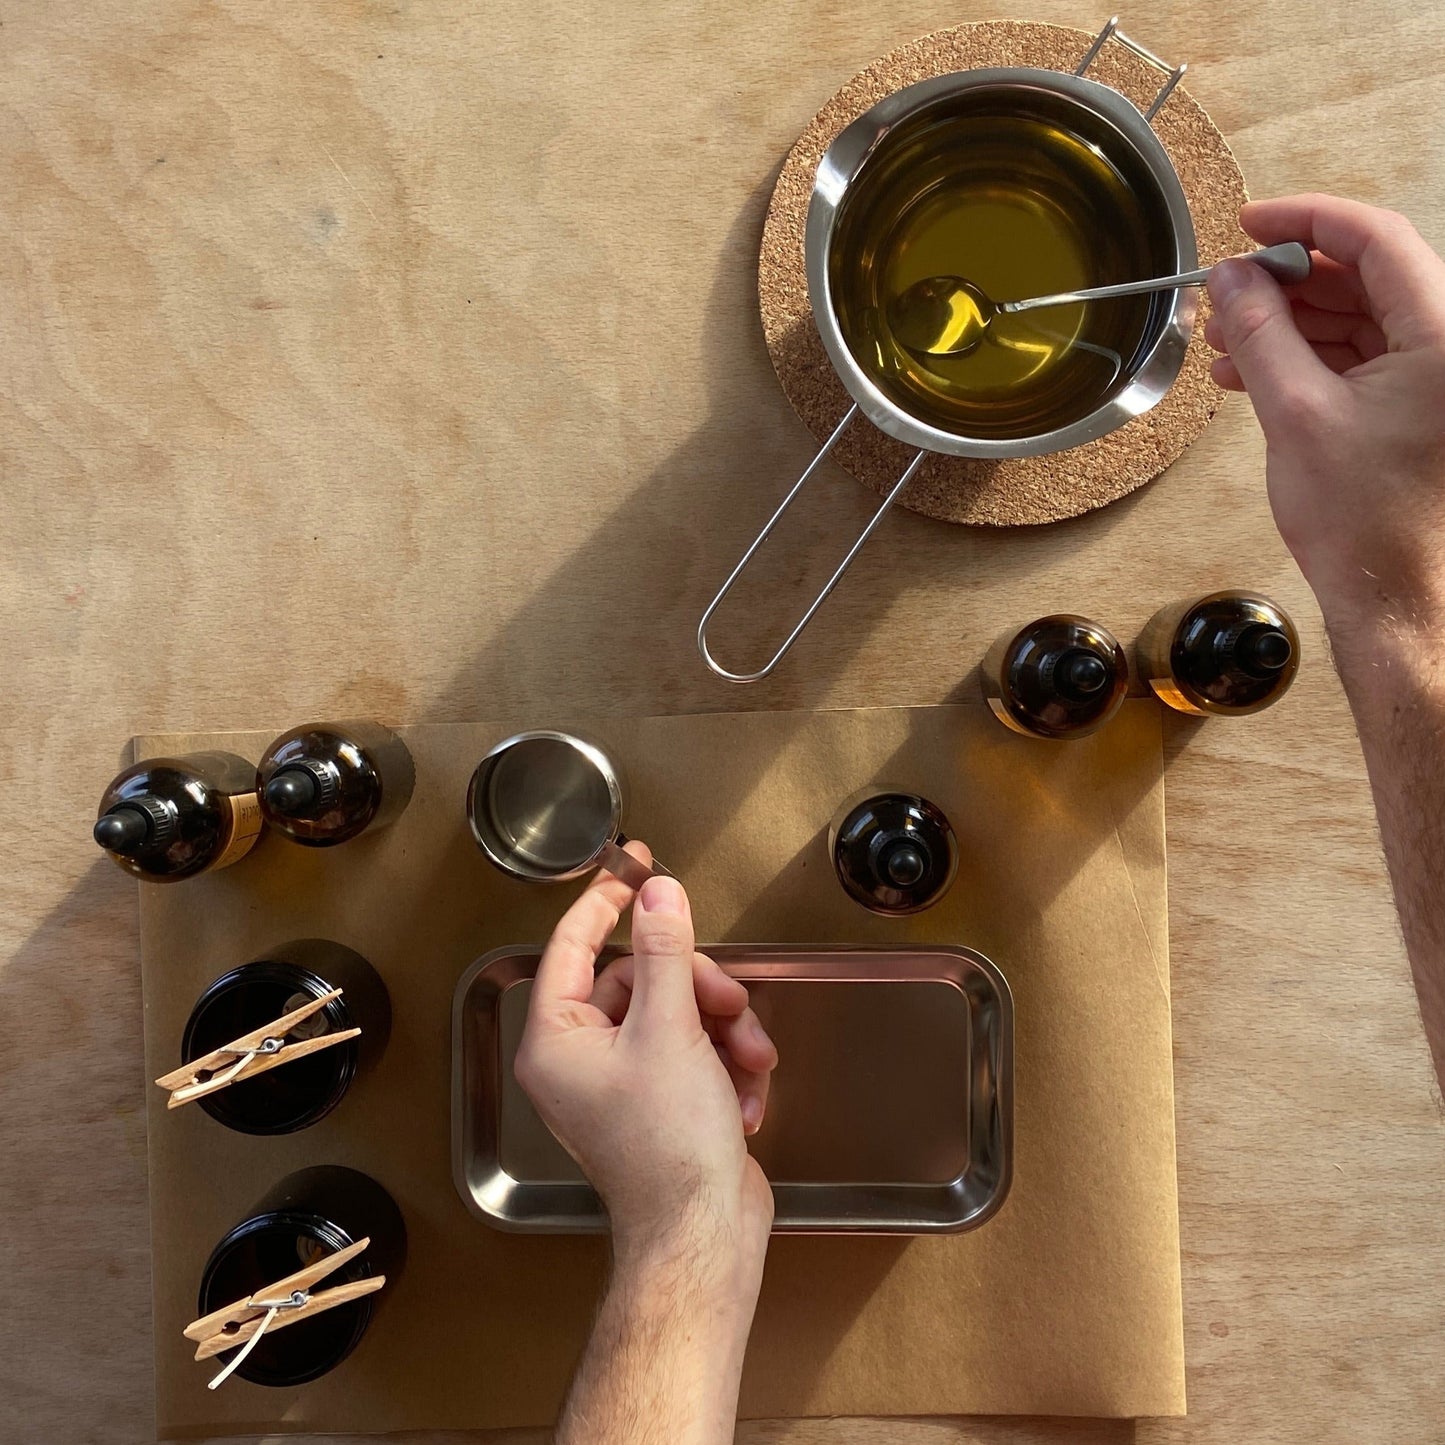 Brighton All Natural Candle Making Workshop | Wednesday 6th March, 7:00pm